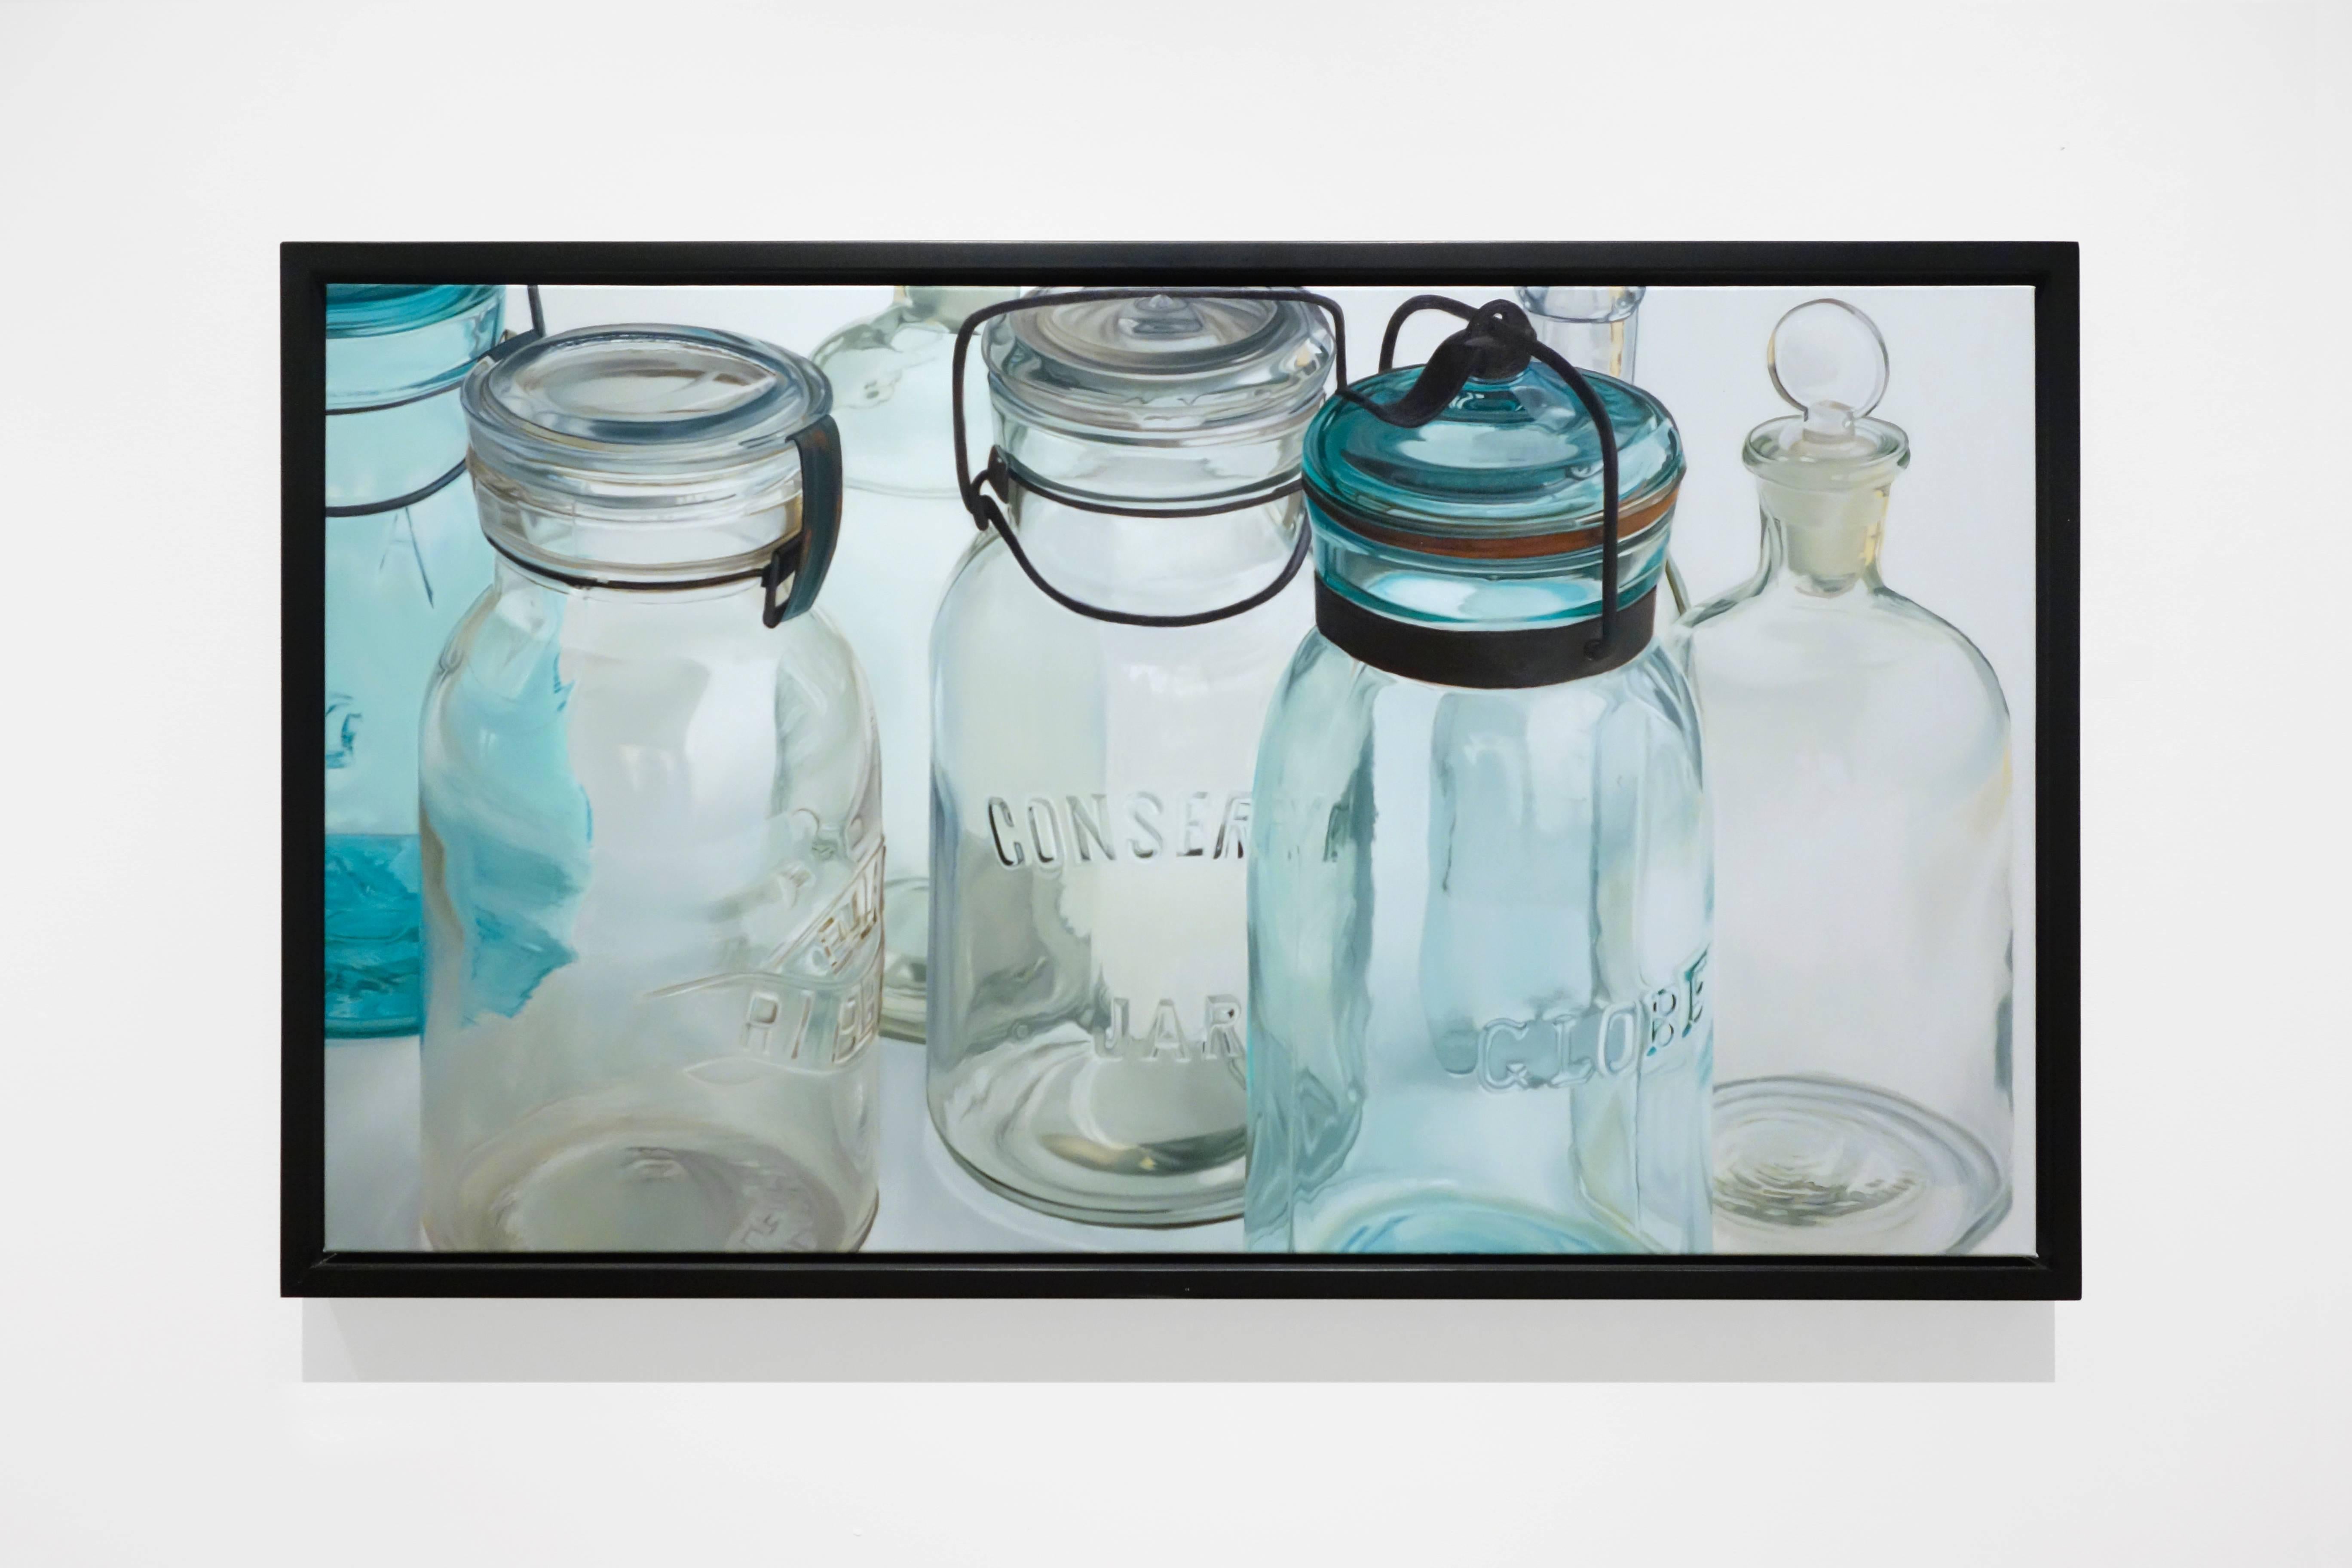 BEYOND THE PALE - Photorealism / Still Life / Glass and Light - Painting by Steve Smulka